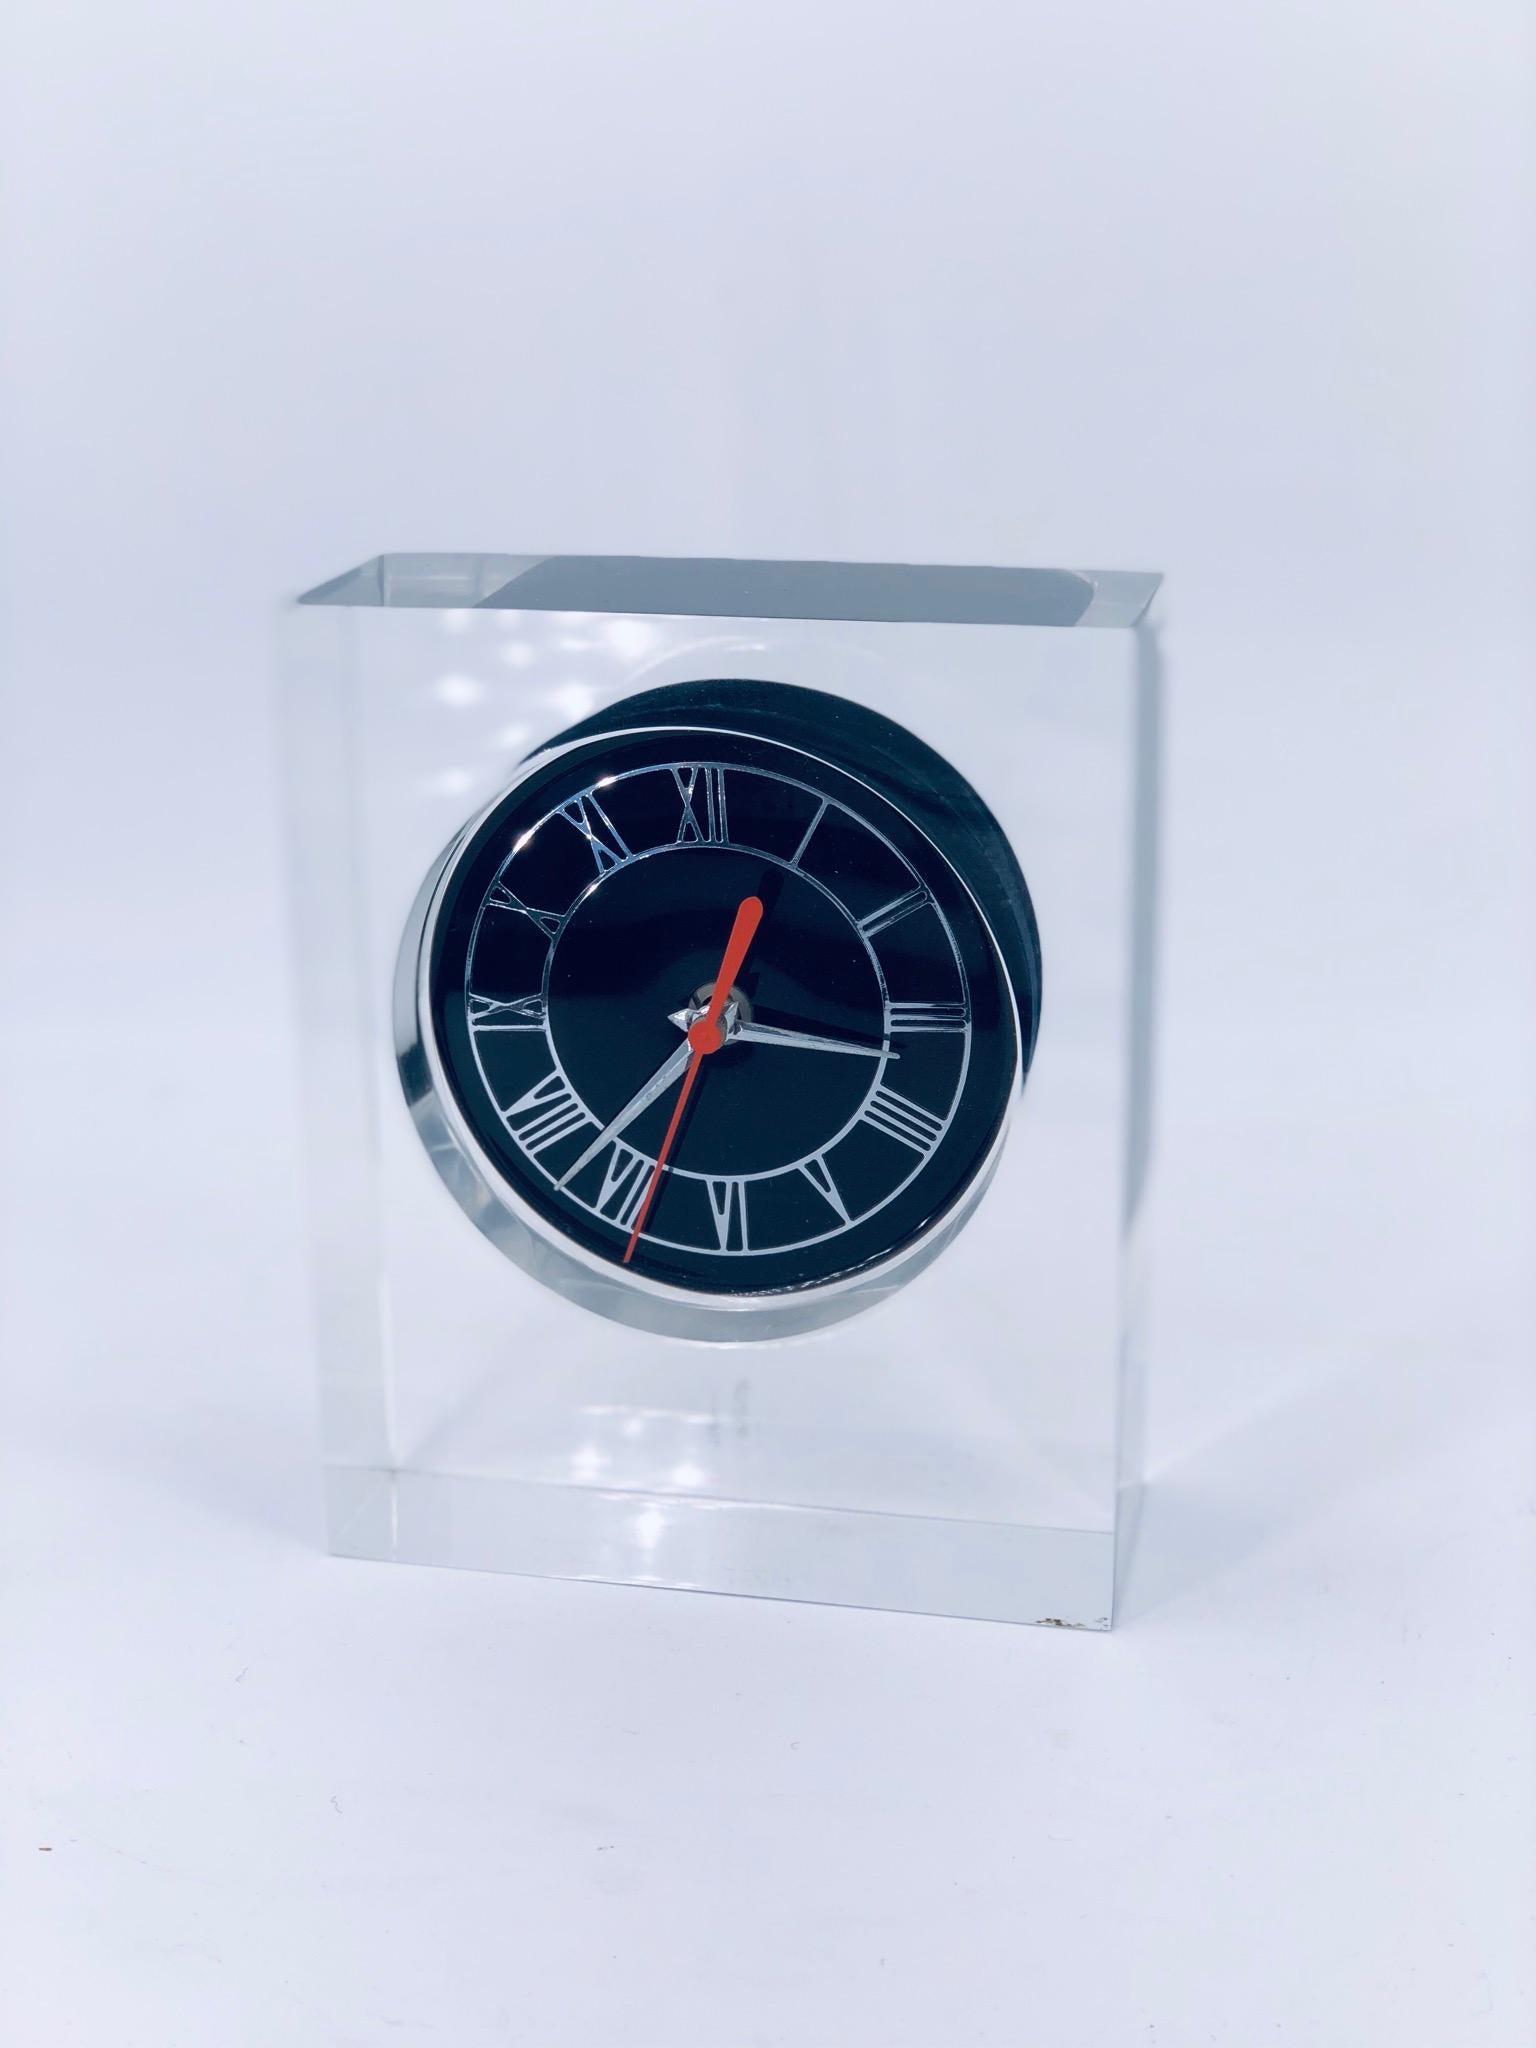 A beautiful solid Lucite table clock designed by Junghams circa 1970s, battery operated and working condition keep good time. Roman numbers in silver and black Lucite face, German movement.